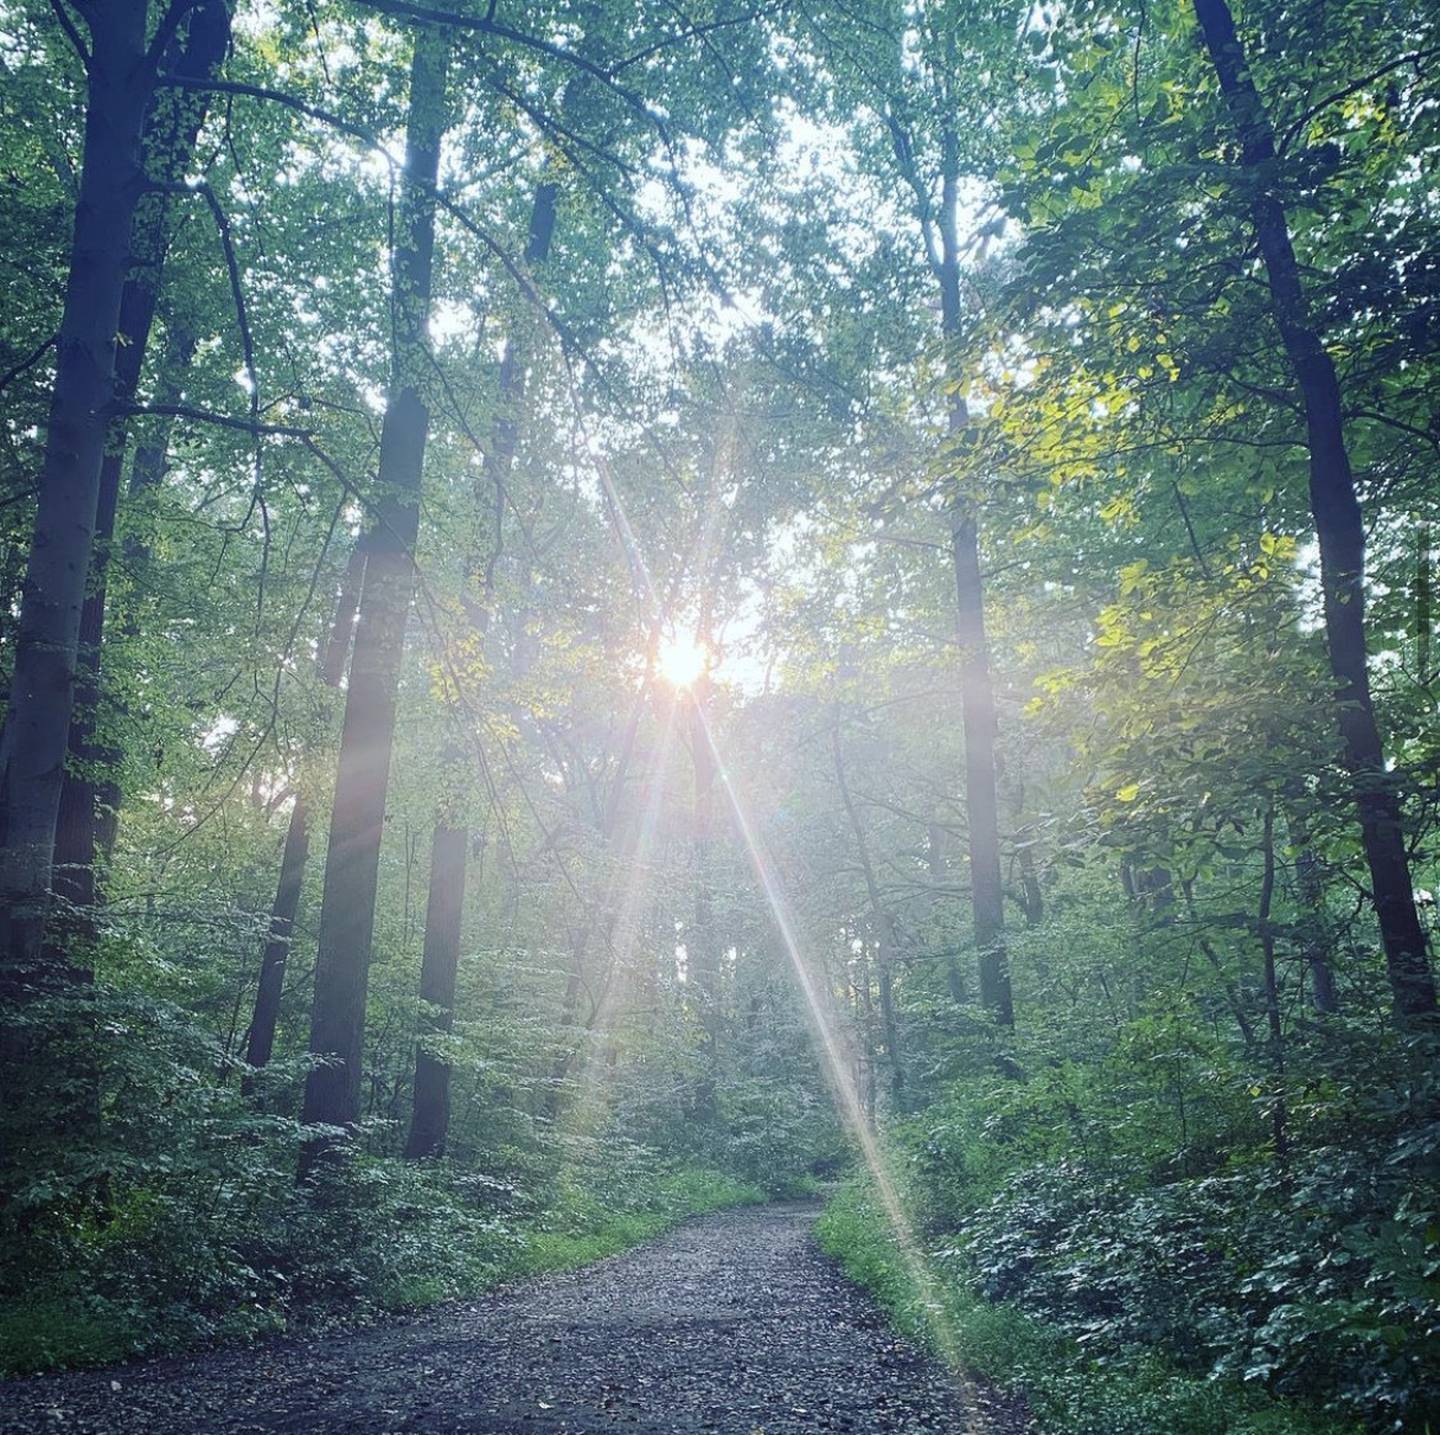 The sun shines through the trees after a rainstorm in the Loch Raven watershed.